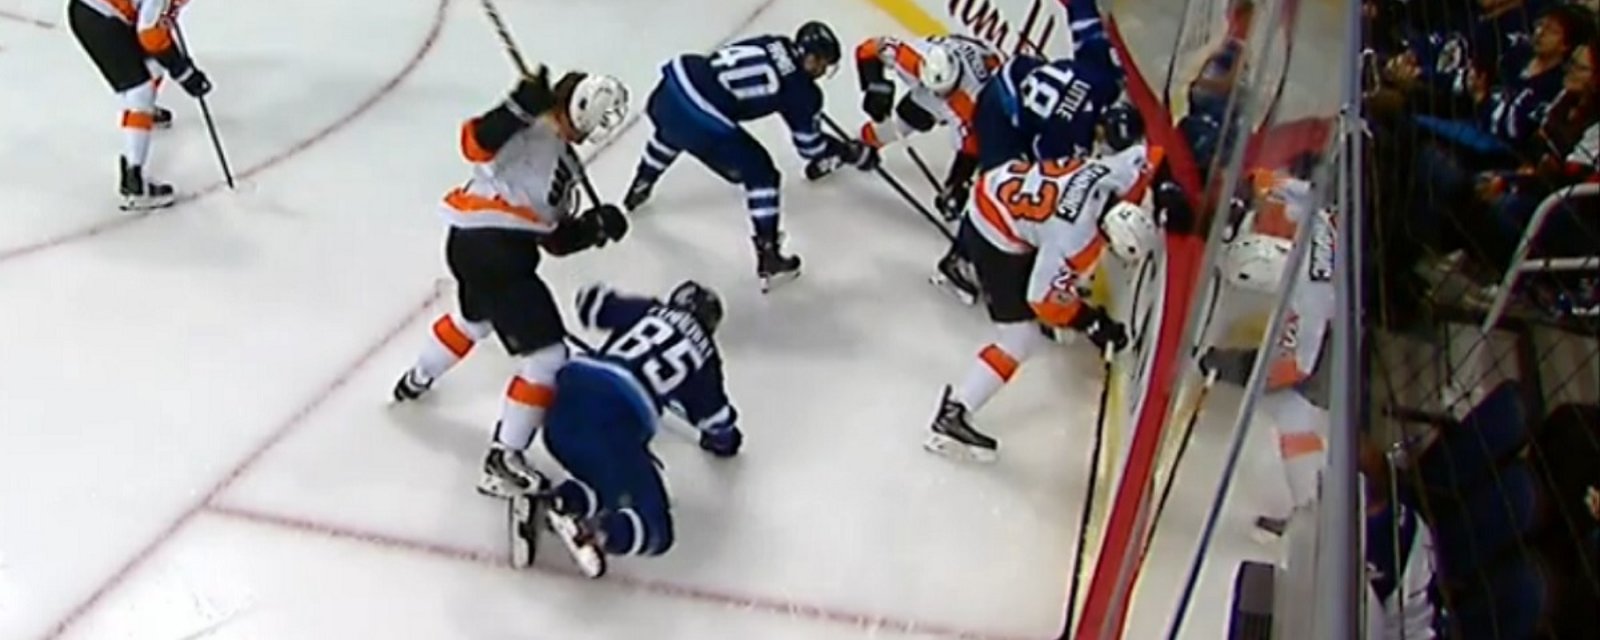 Breaking: Gudas ejected from the game after brutal slash to the head. 